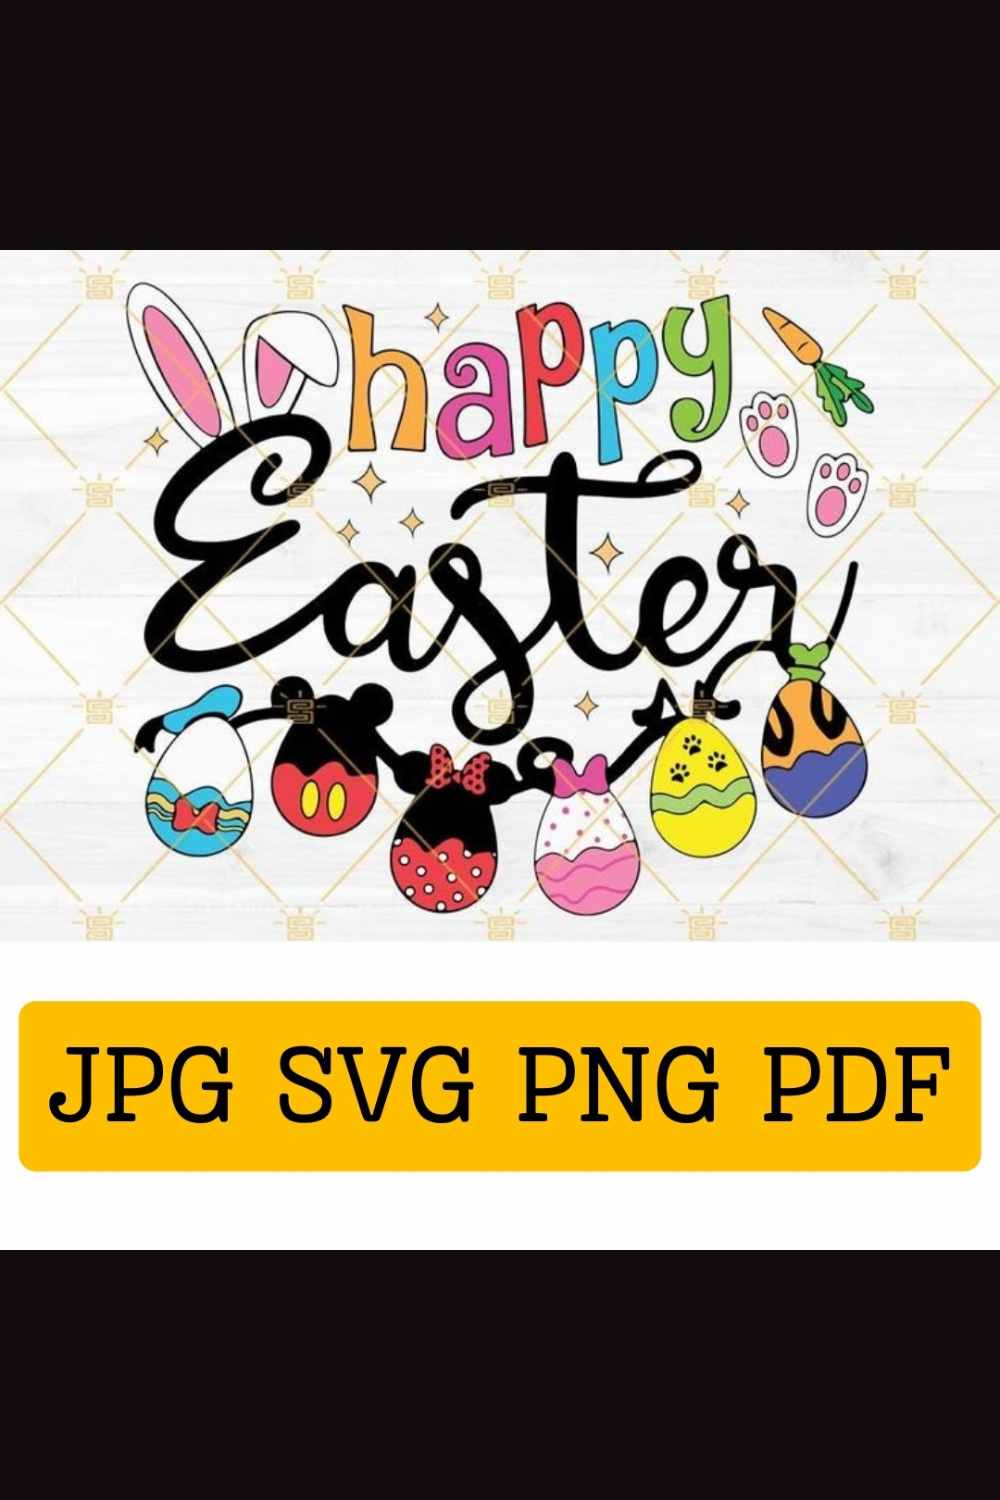 HAPPY EASTER pinterest preview image.